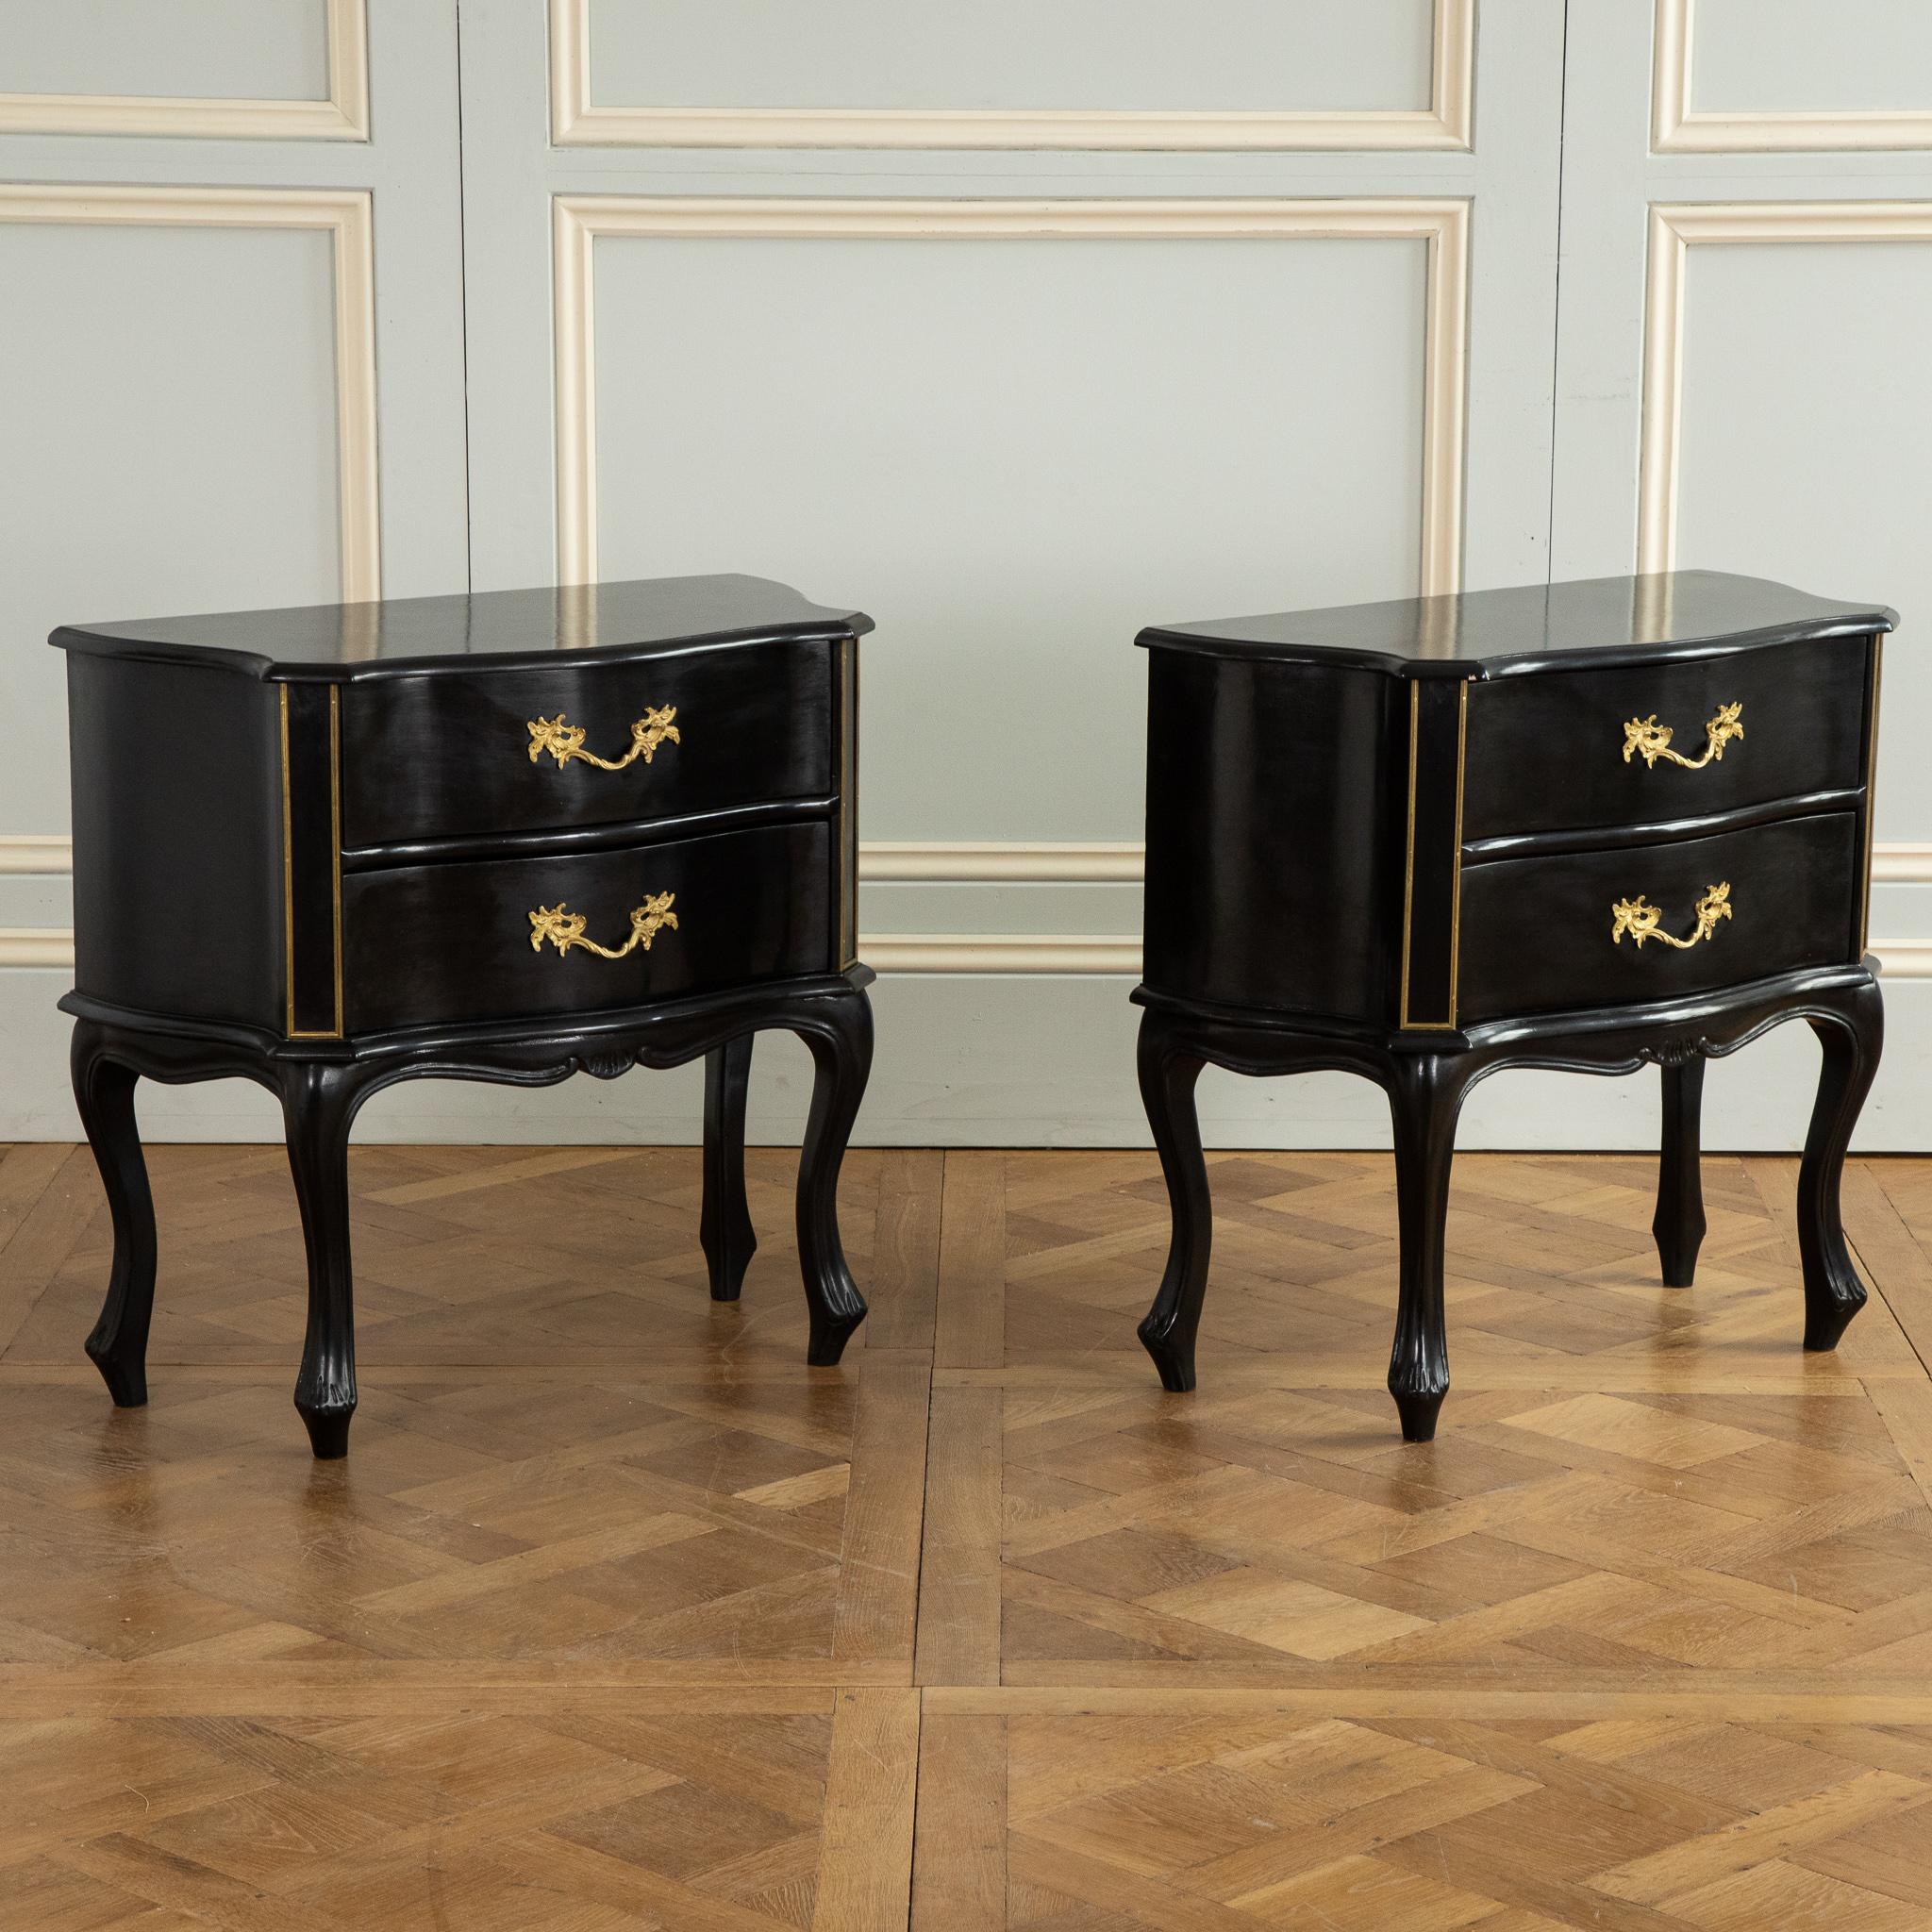 Pair of Louis XV style chest of drawers,Night stands made by La Maison London
Black lacquered with bronzes handles and filigree.
Serpentine legs 
2 x drawers per commode.
 